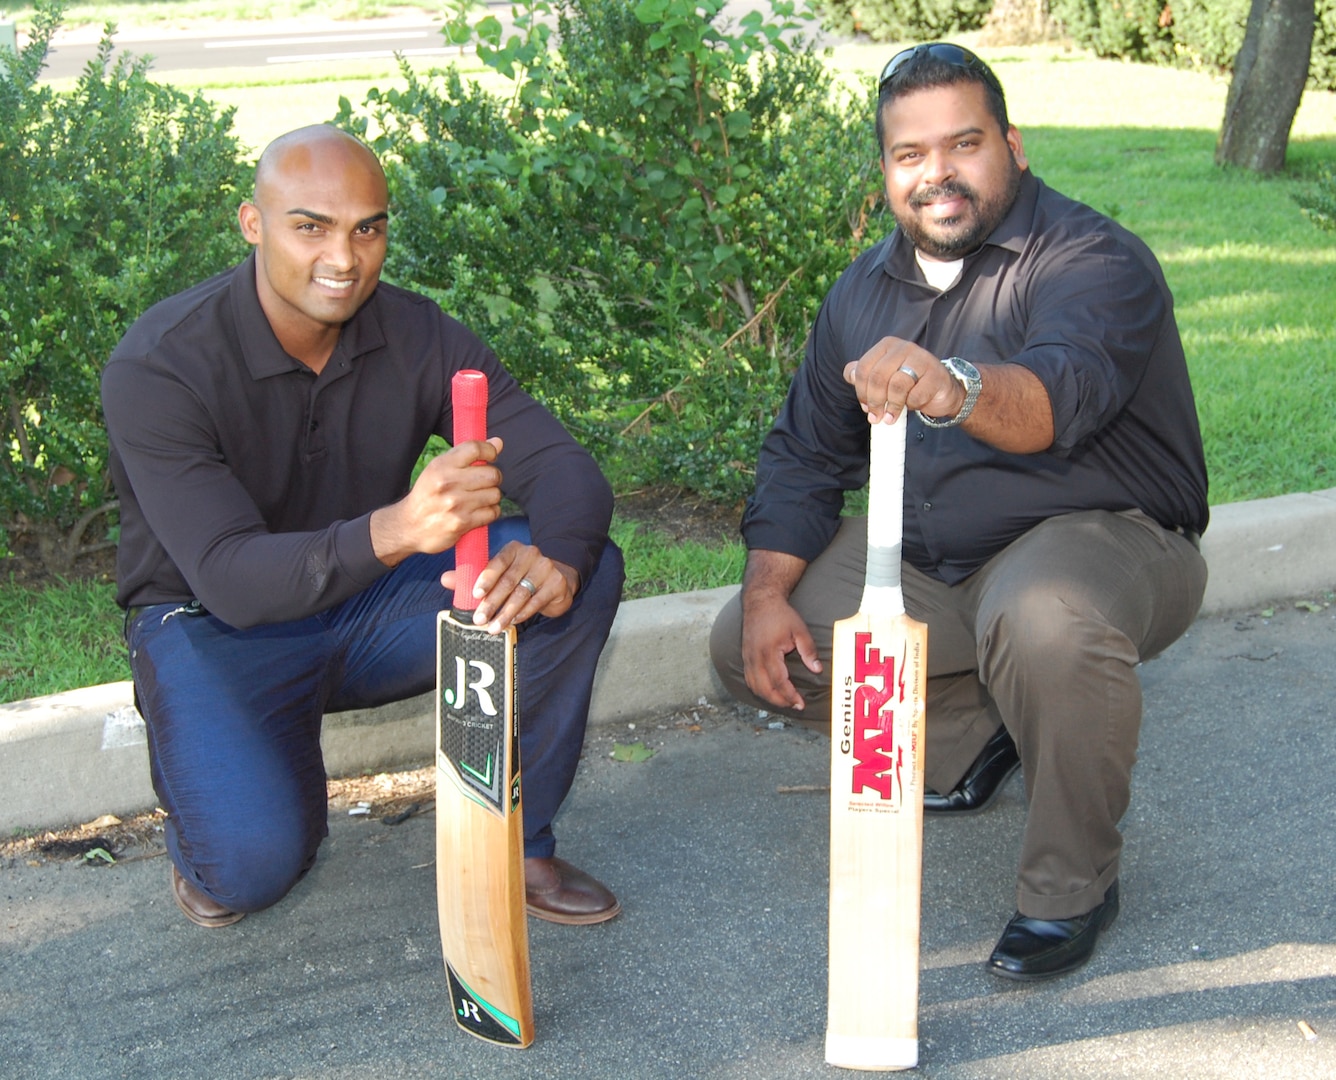 Two men, both holding their cricket bat, kneel to the ground.